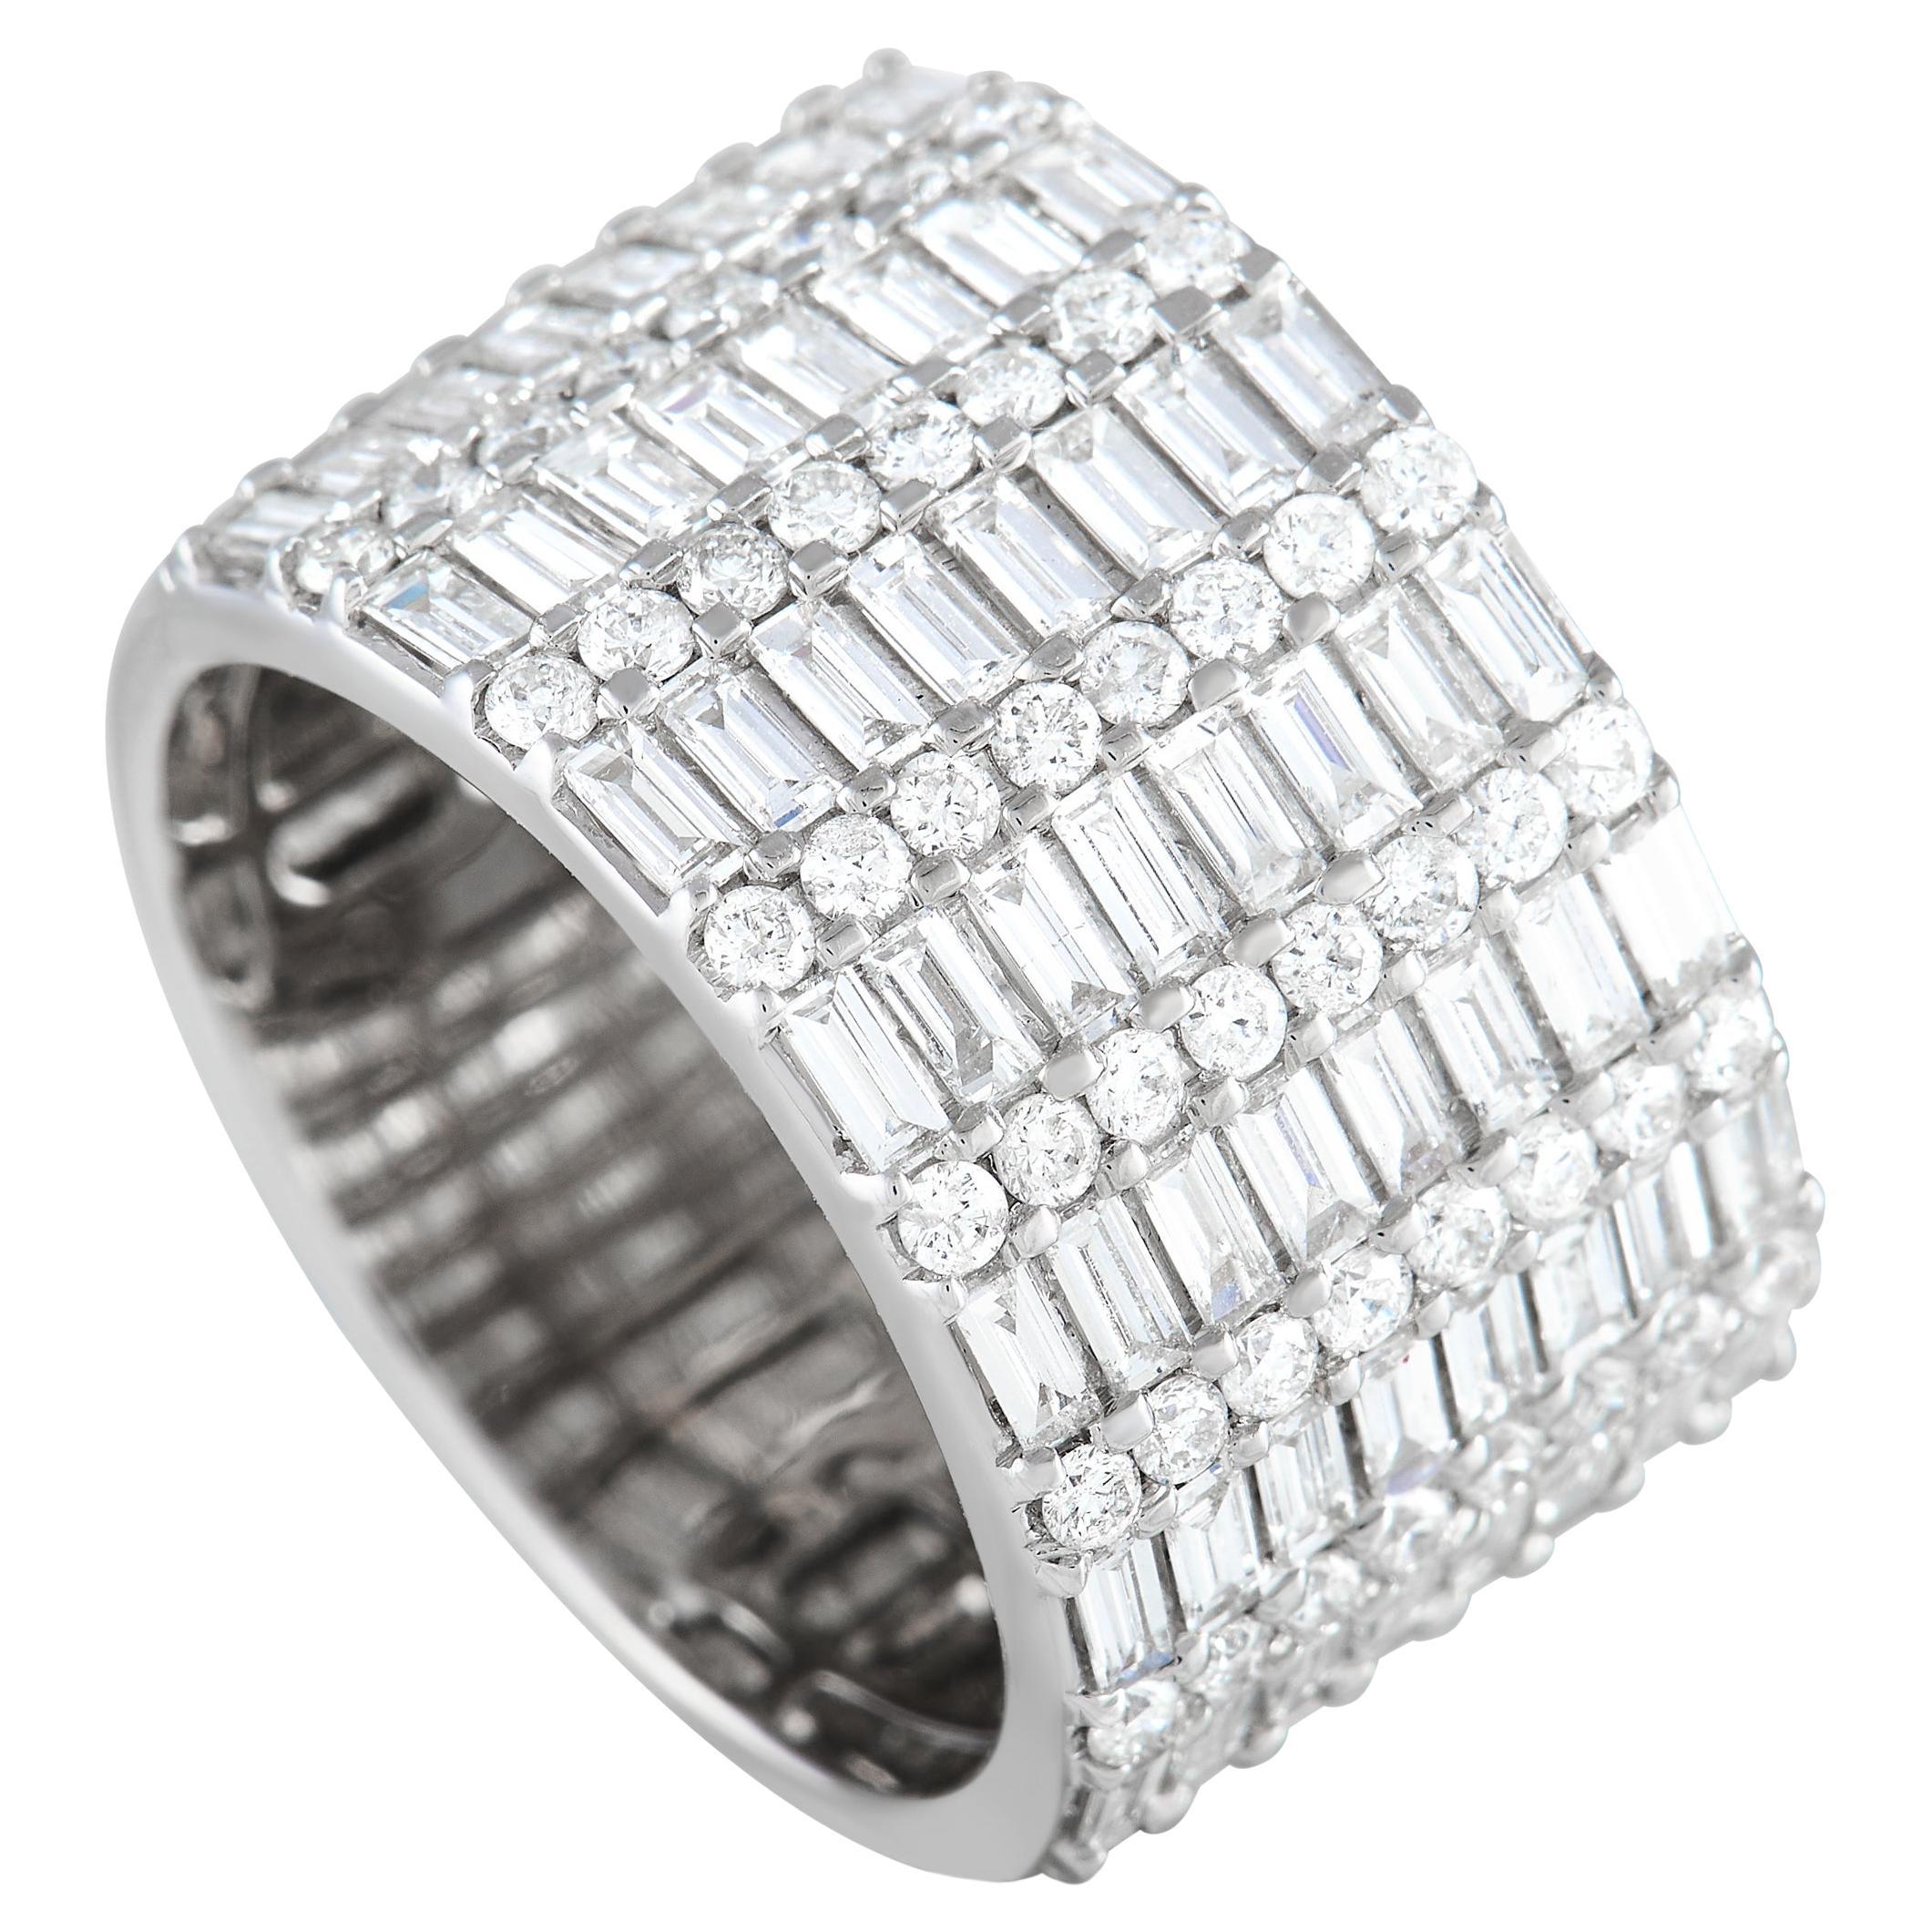 LB Exclusive 14K White Gold Diamond 2.48 ct Wide Band Ring